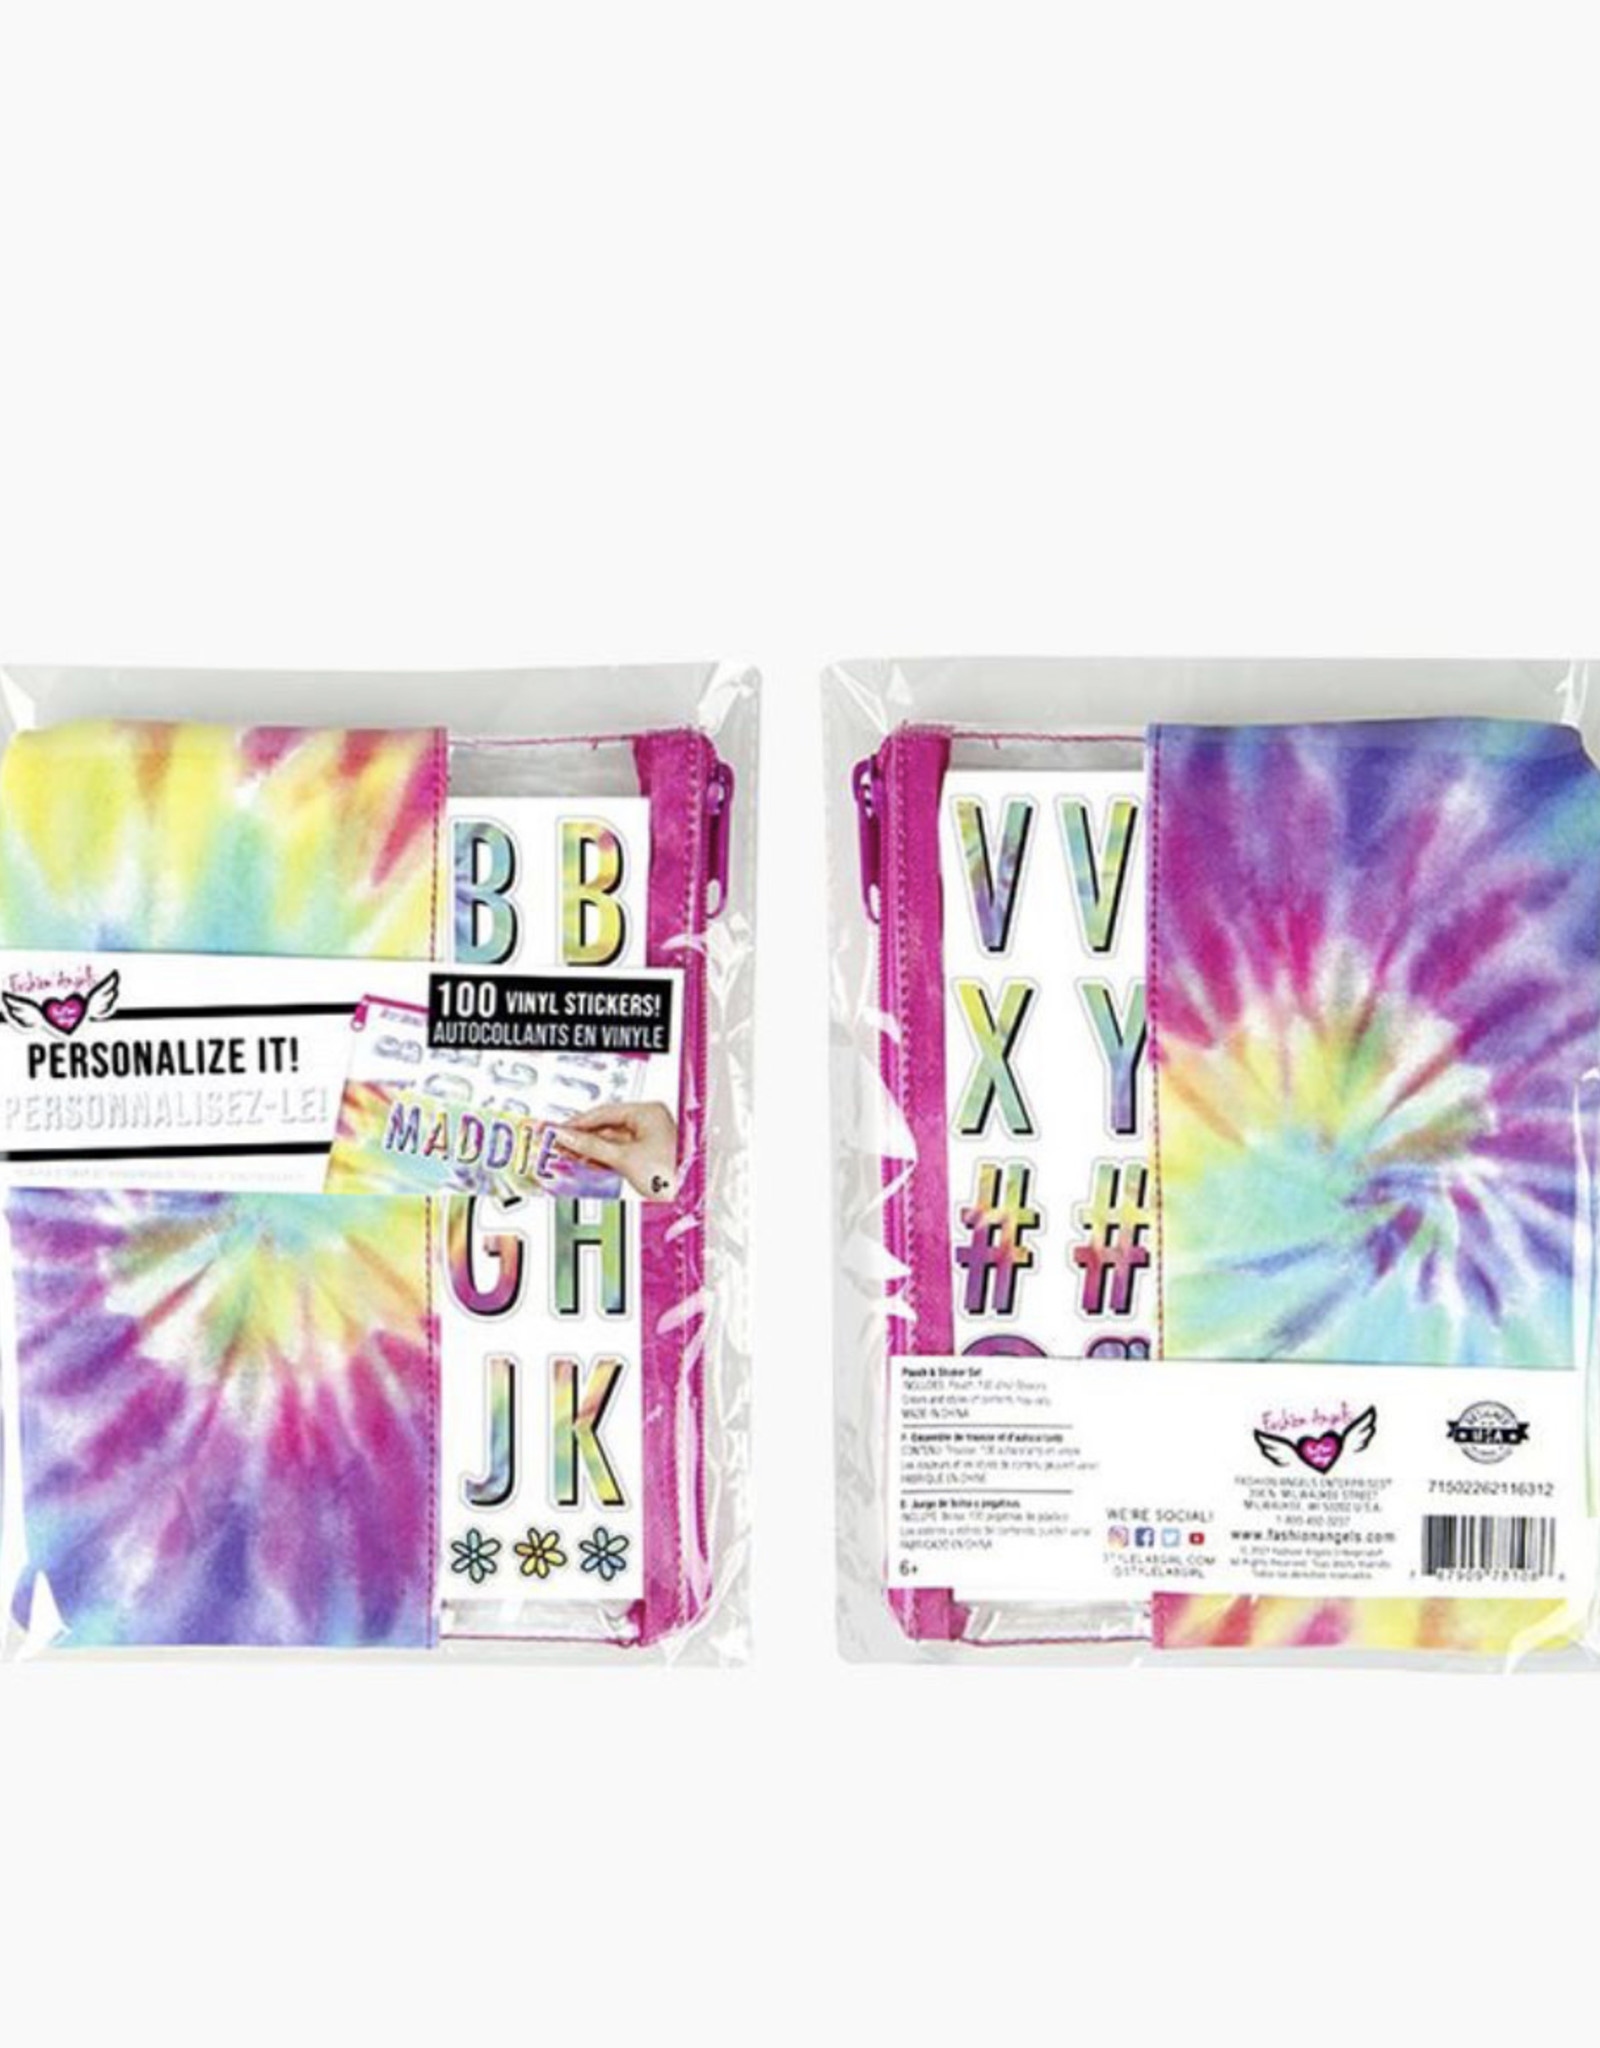 Fashion Angels Personalize It! Rainbow Tie Dye Pouch with Stickers